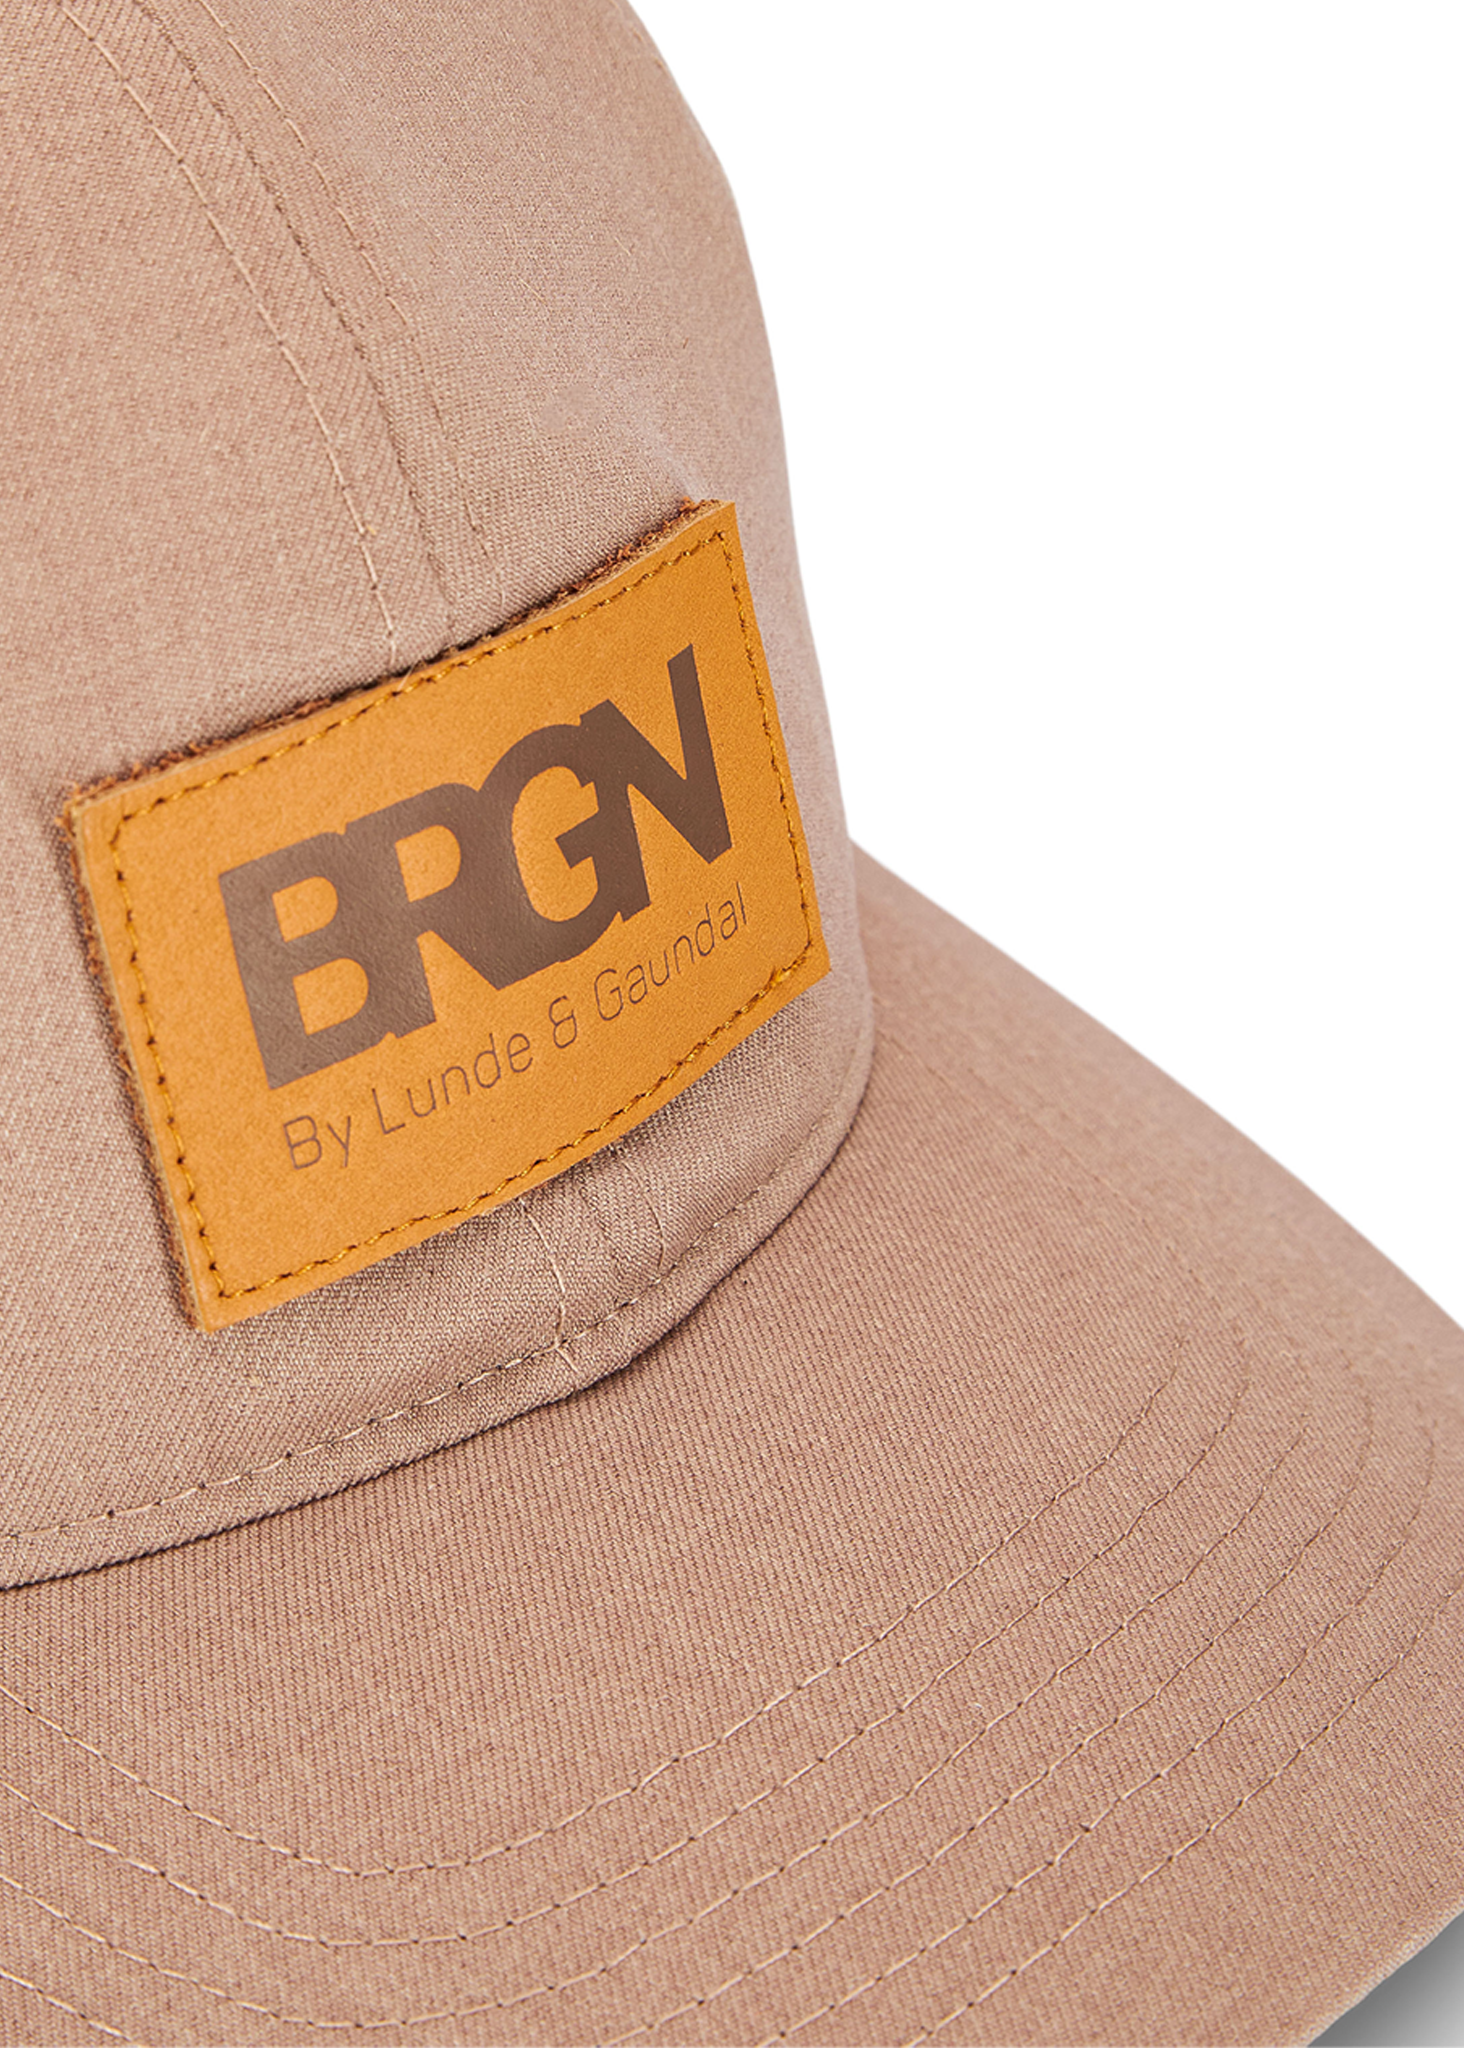 BRGN Solregn caps Accessories 141 Taupe